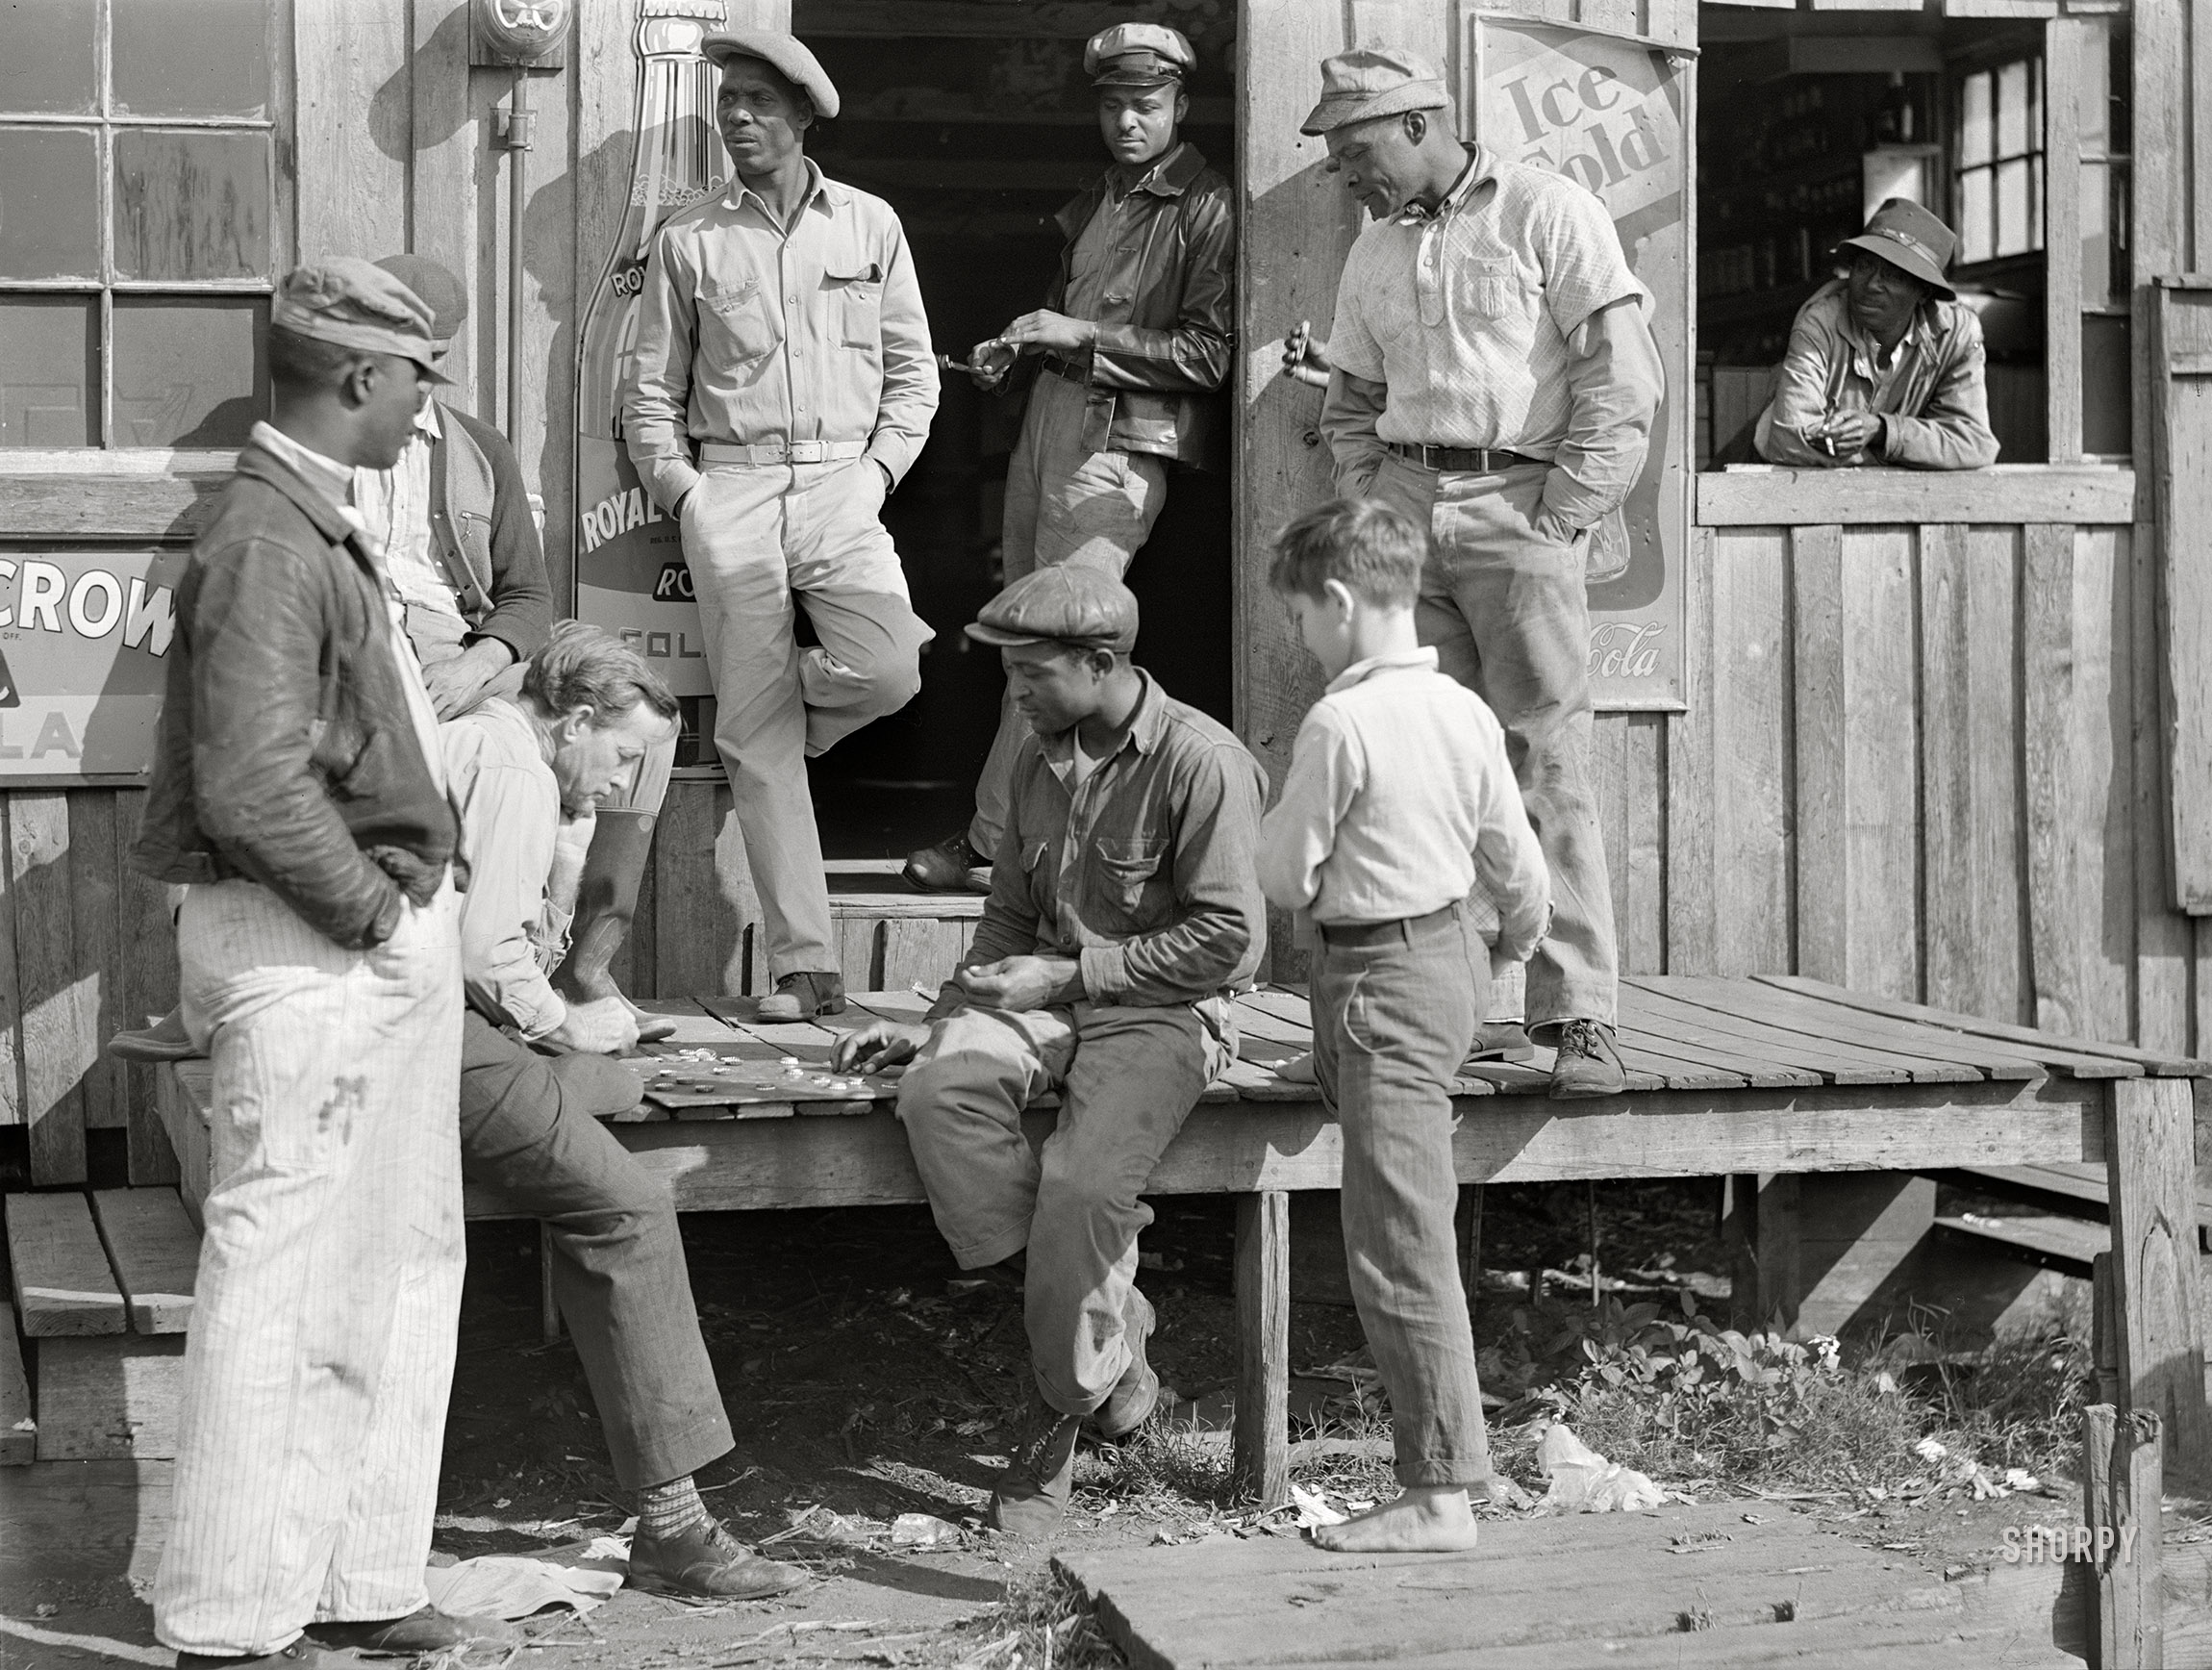 February 1941. Belle Glade, Florida. "Migratory laborers playing checkers in front of juke joint during slack season for vegetable pickers." Medium format acetate negative by Marion Post Wolcott for the Farm Security Administration. View full size.